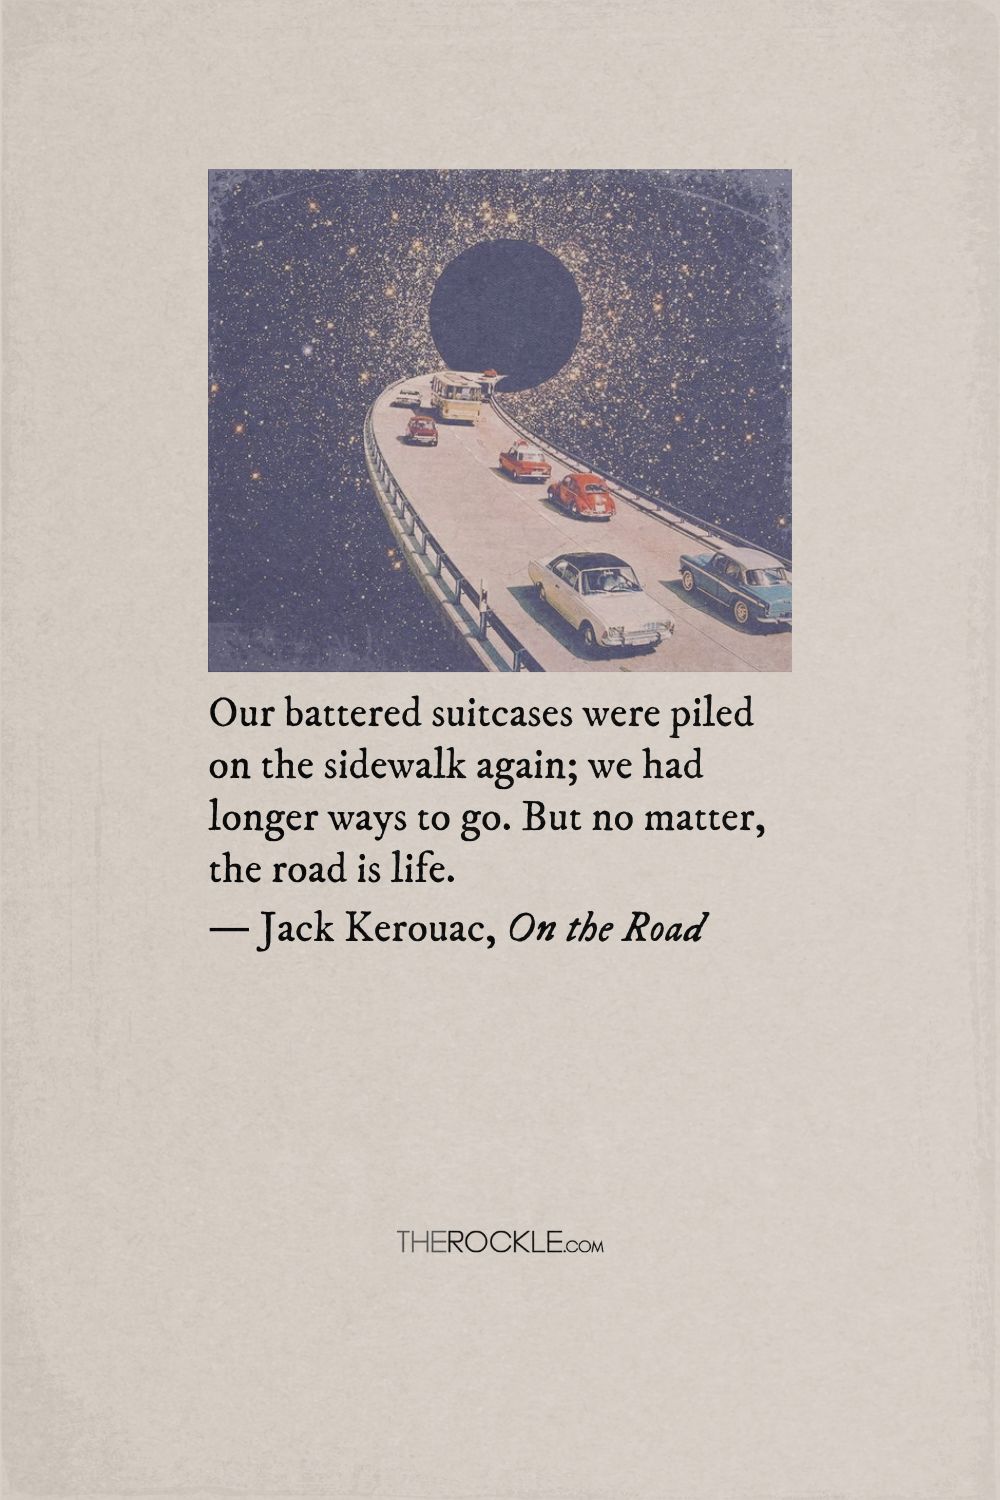 Jack Kerouac's quote about the road of life